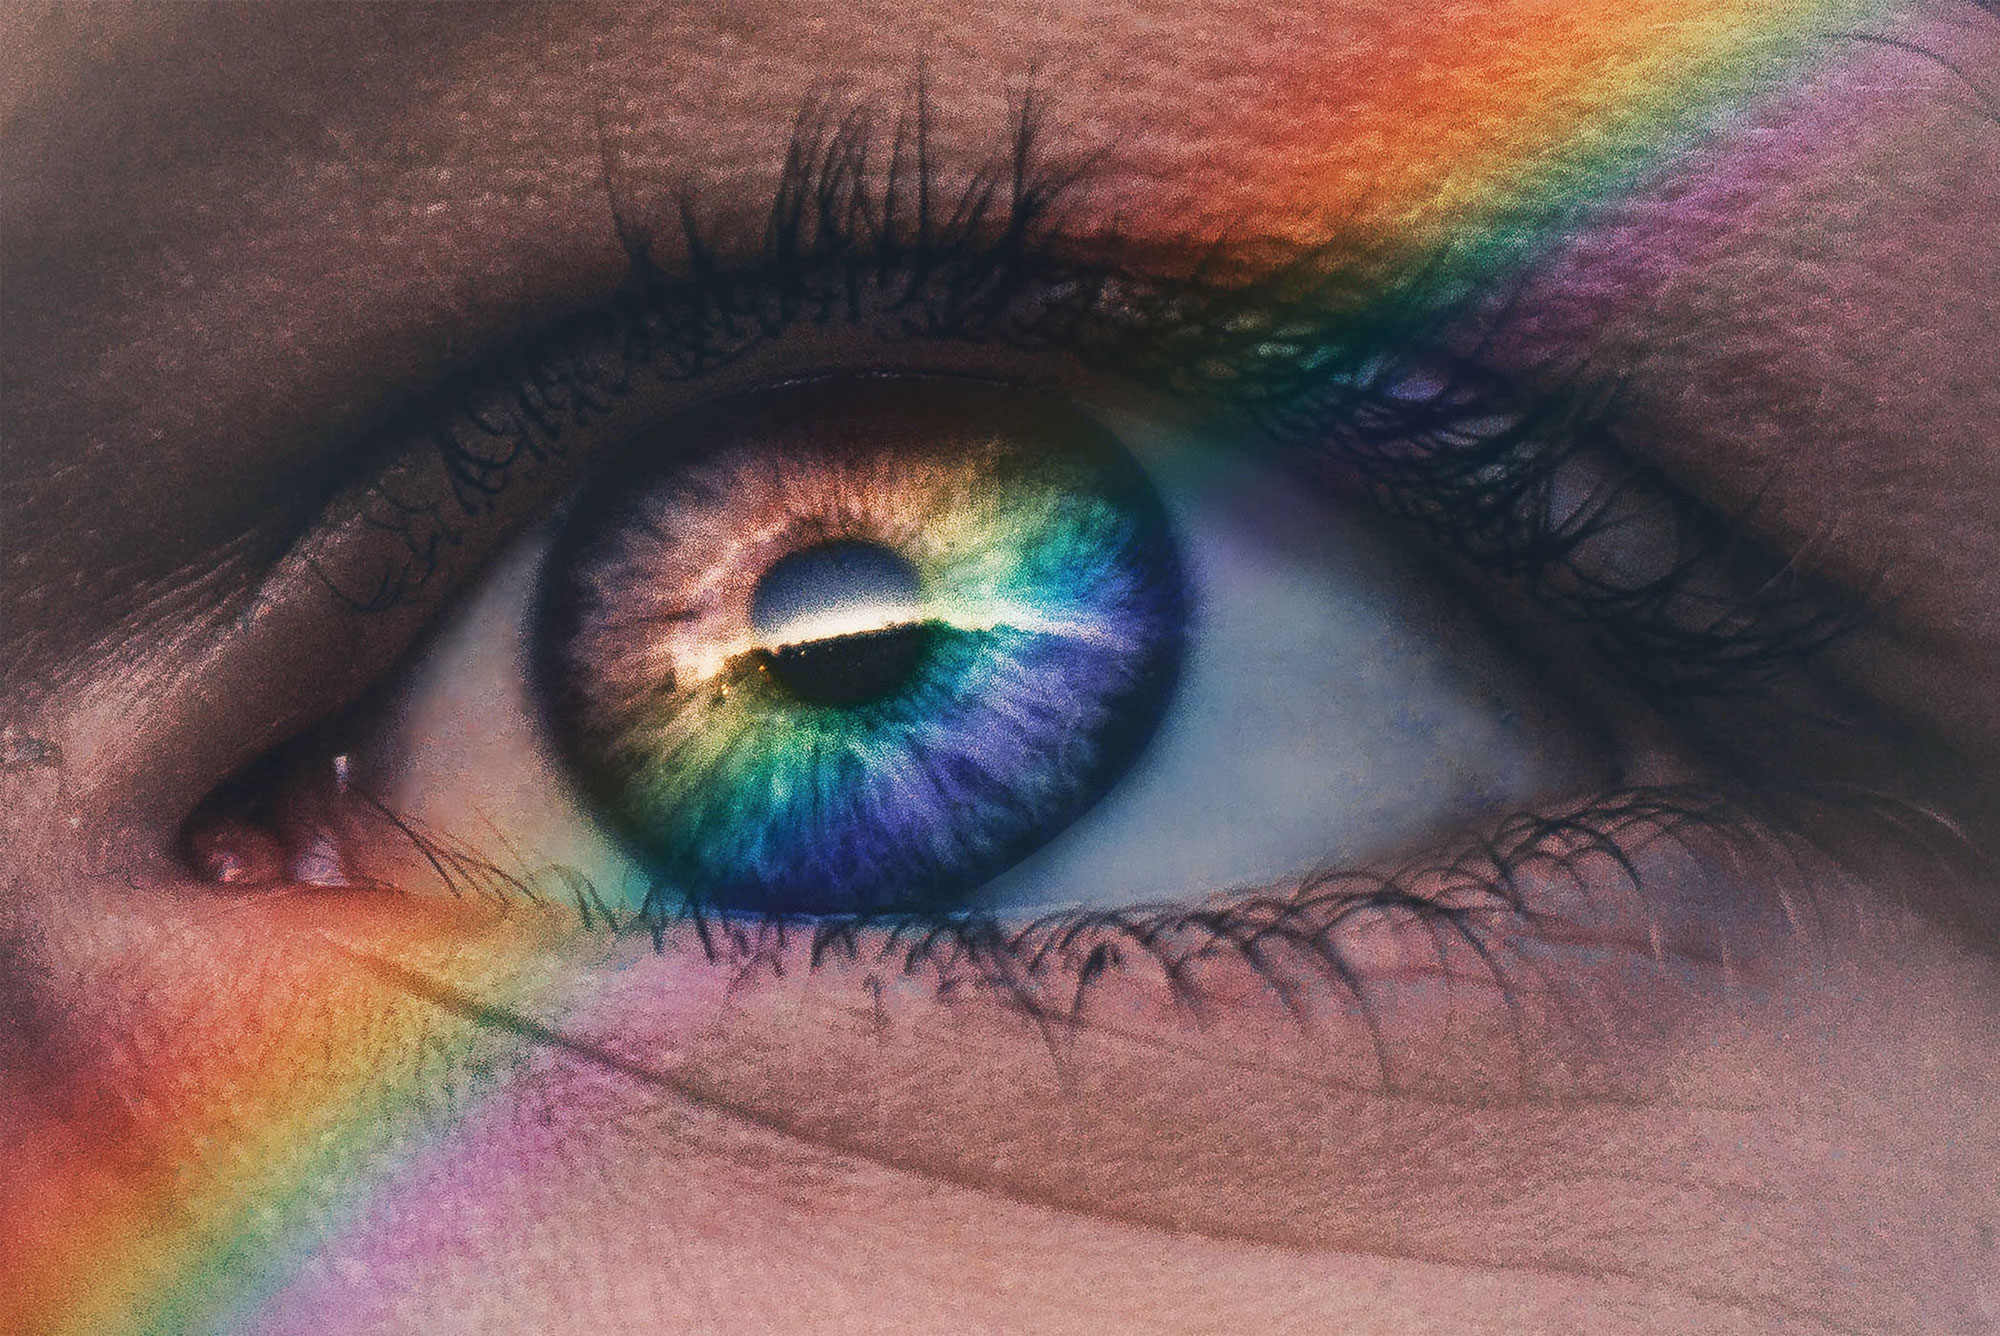 Close up image of an eye with rainbow across it